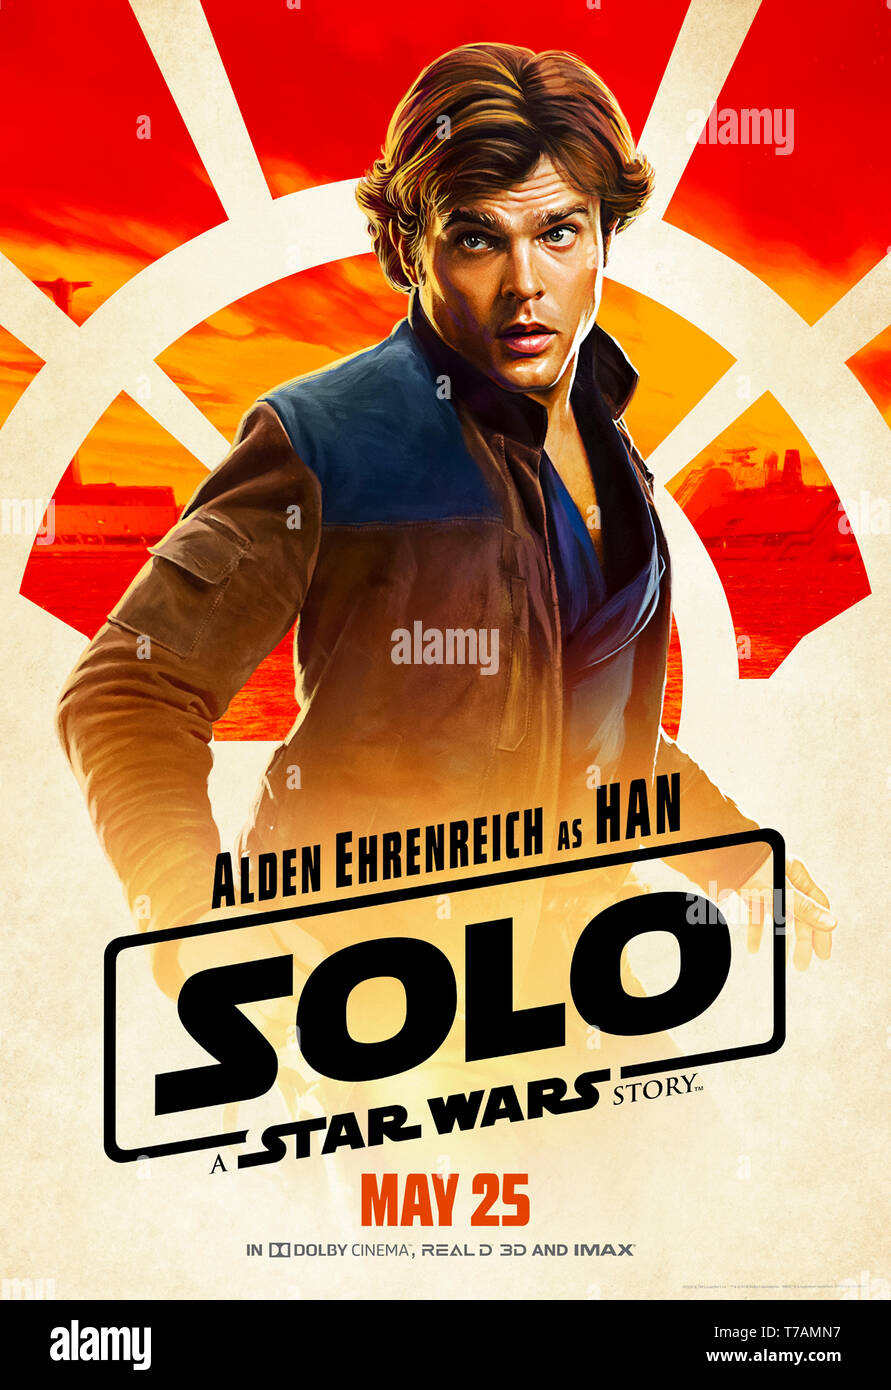 Solo: A Star Wars Story (2018) directed by Ron Howard and starring Alden Ehrenreich as the young Han Solo. Stock Photo